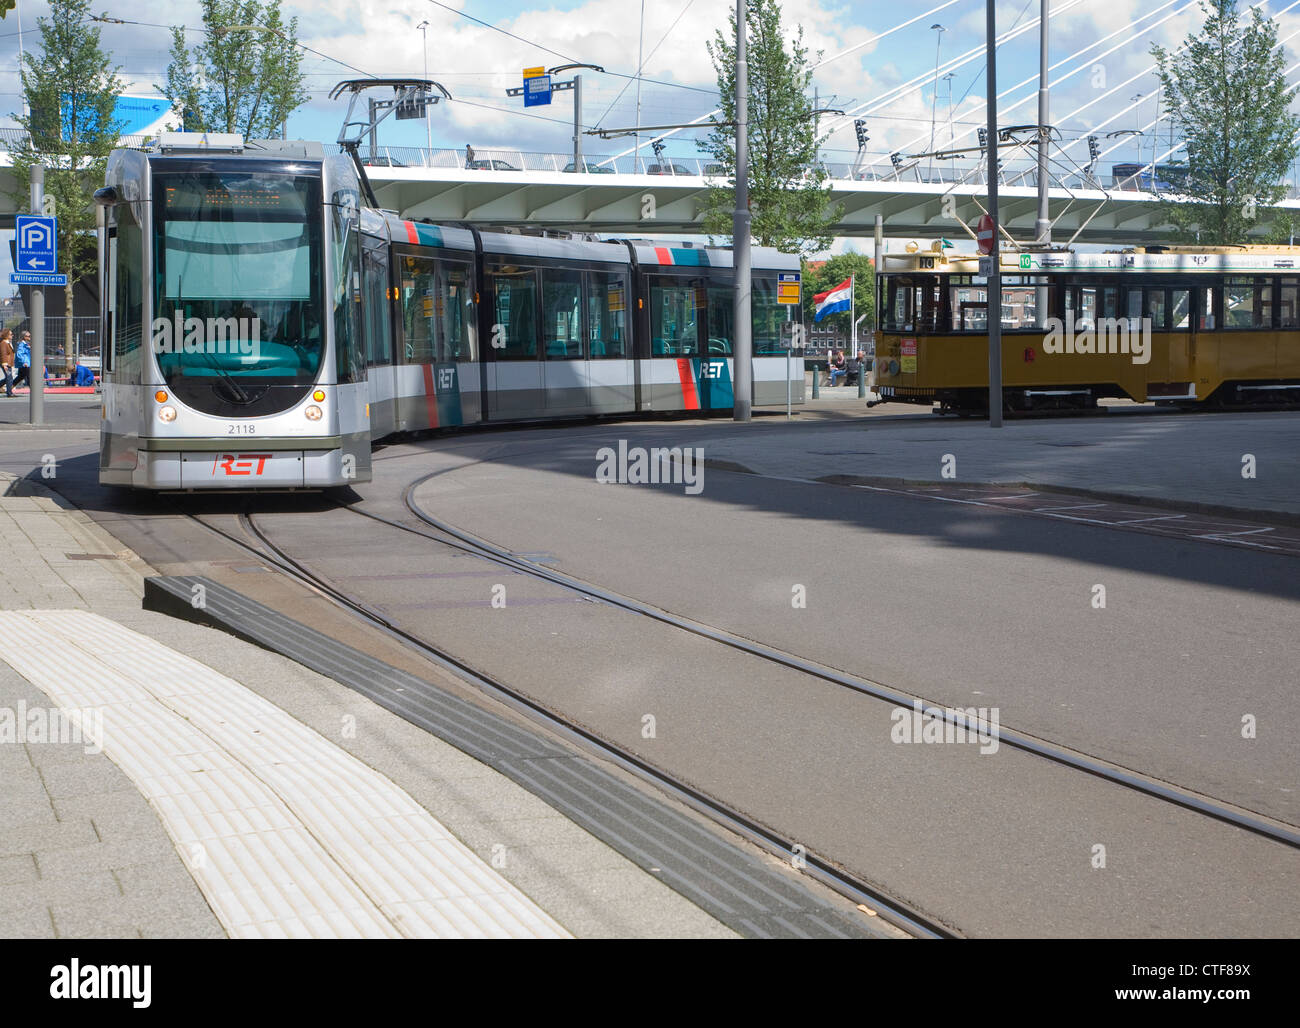 Tram train in the streets of Rotterdam, Netherlands Stock Photo